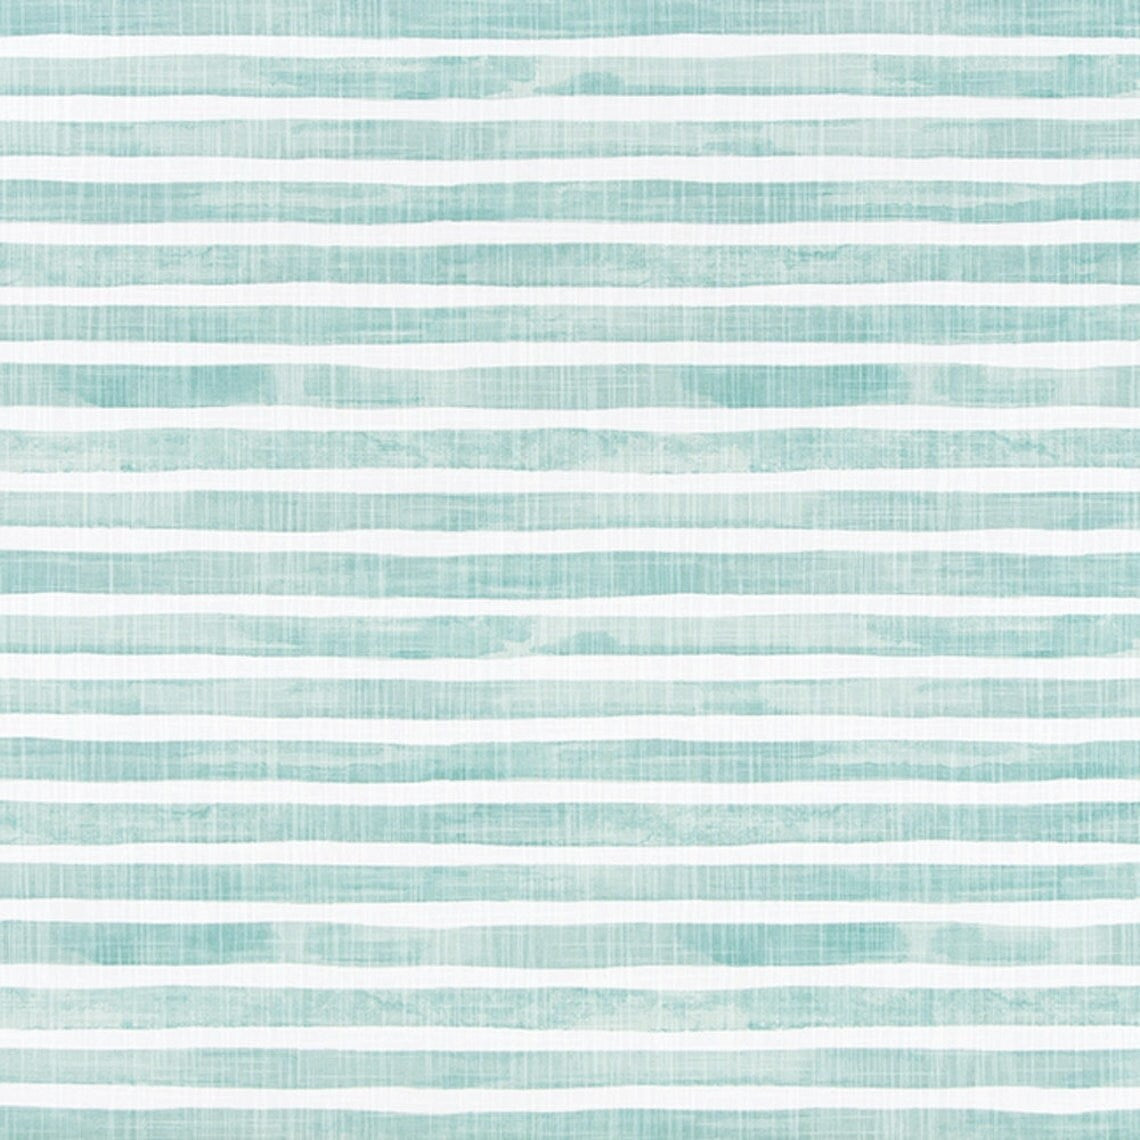 rod pocket curtains in nelson cancun blue horizontal watercolor stripe